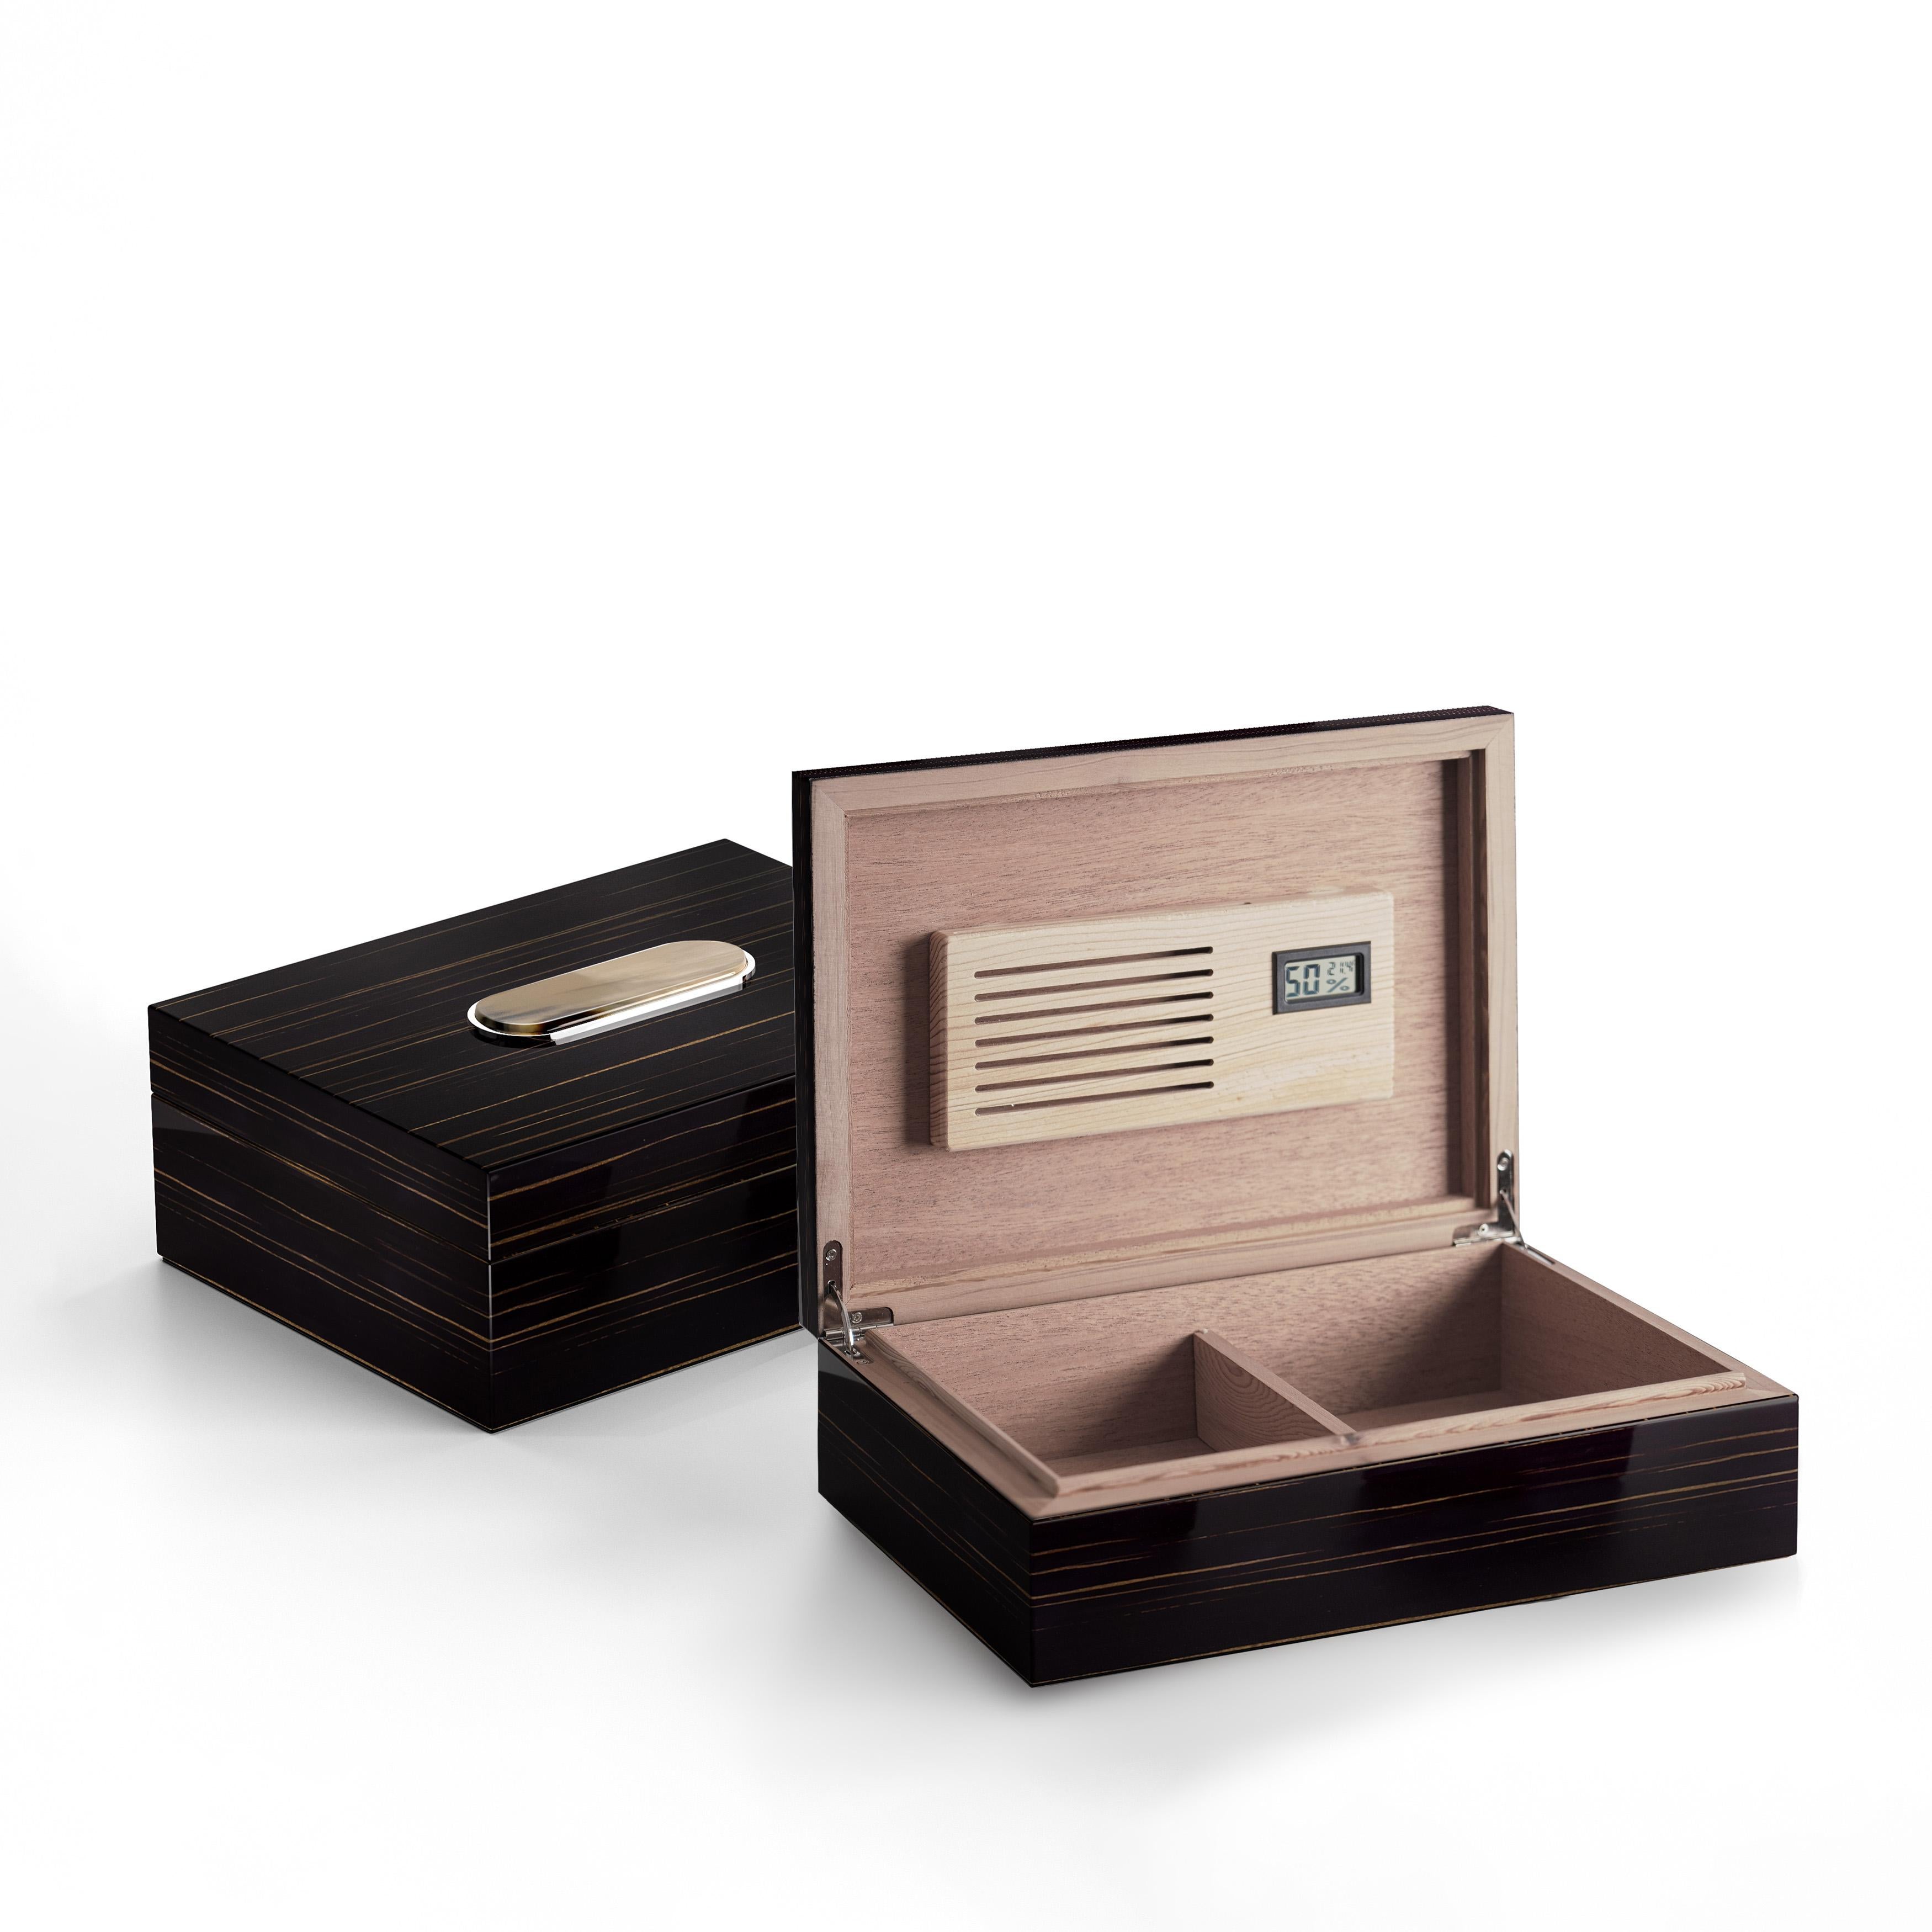 Tailored for discerning smoking enthusiasts, the Sibilla cigar humidor blends exquisite materials with sophisticated design. Crafted with the utmost care, the humidor features an exterior structure in glossy ebony embellished by a decoration in